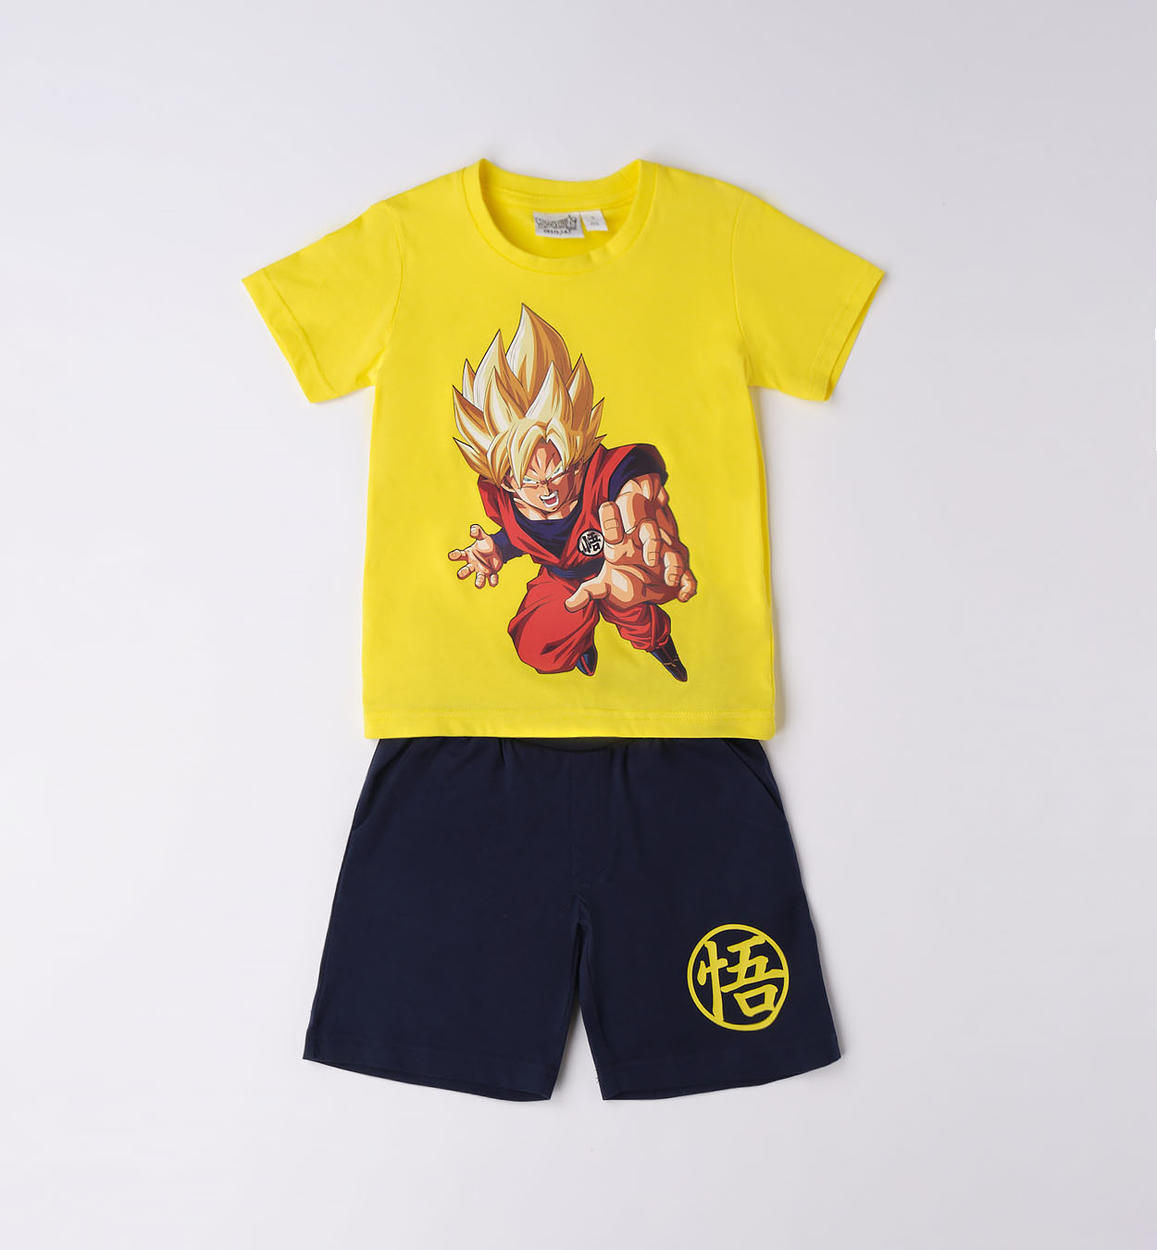 iDO ¿Dragon Ball¿ summer outfit for boys from 9 months to 8 years | iDO